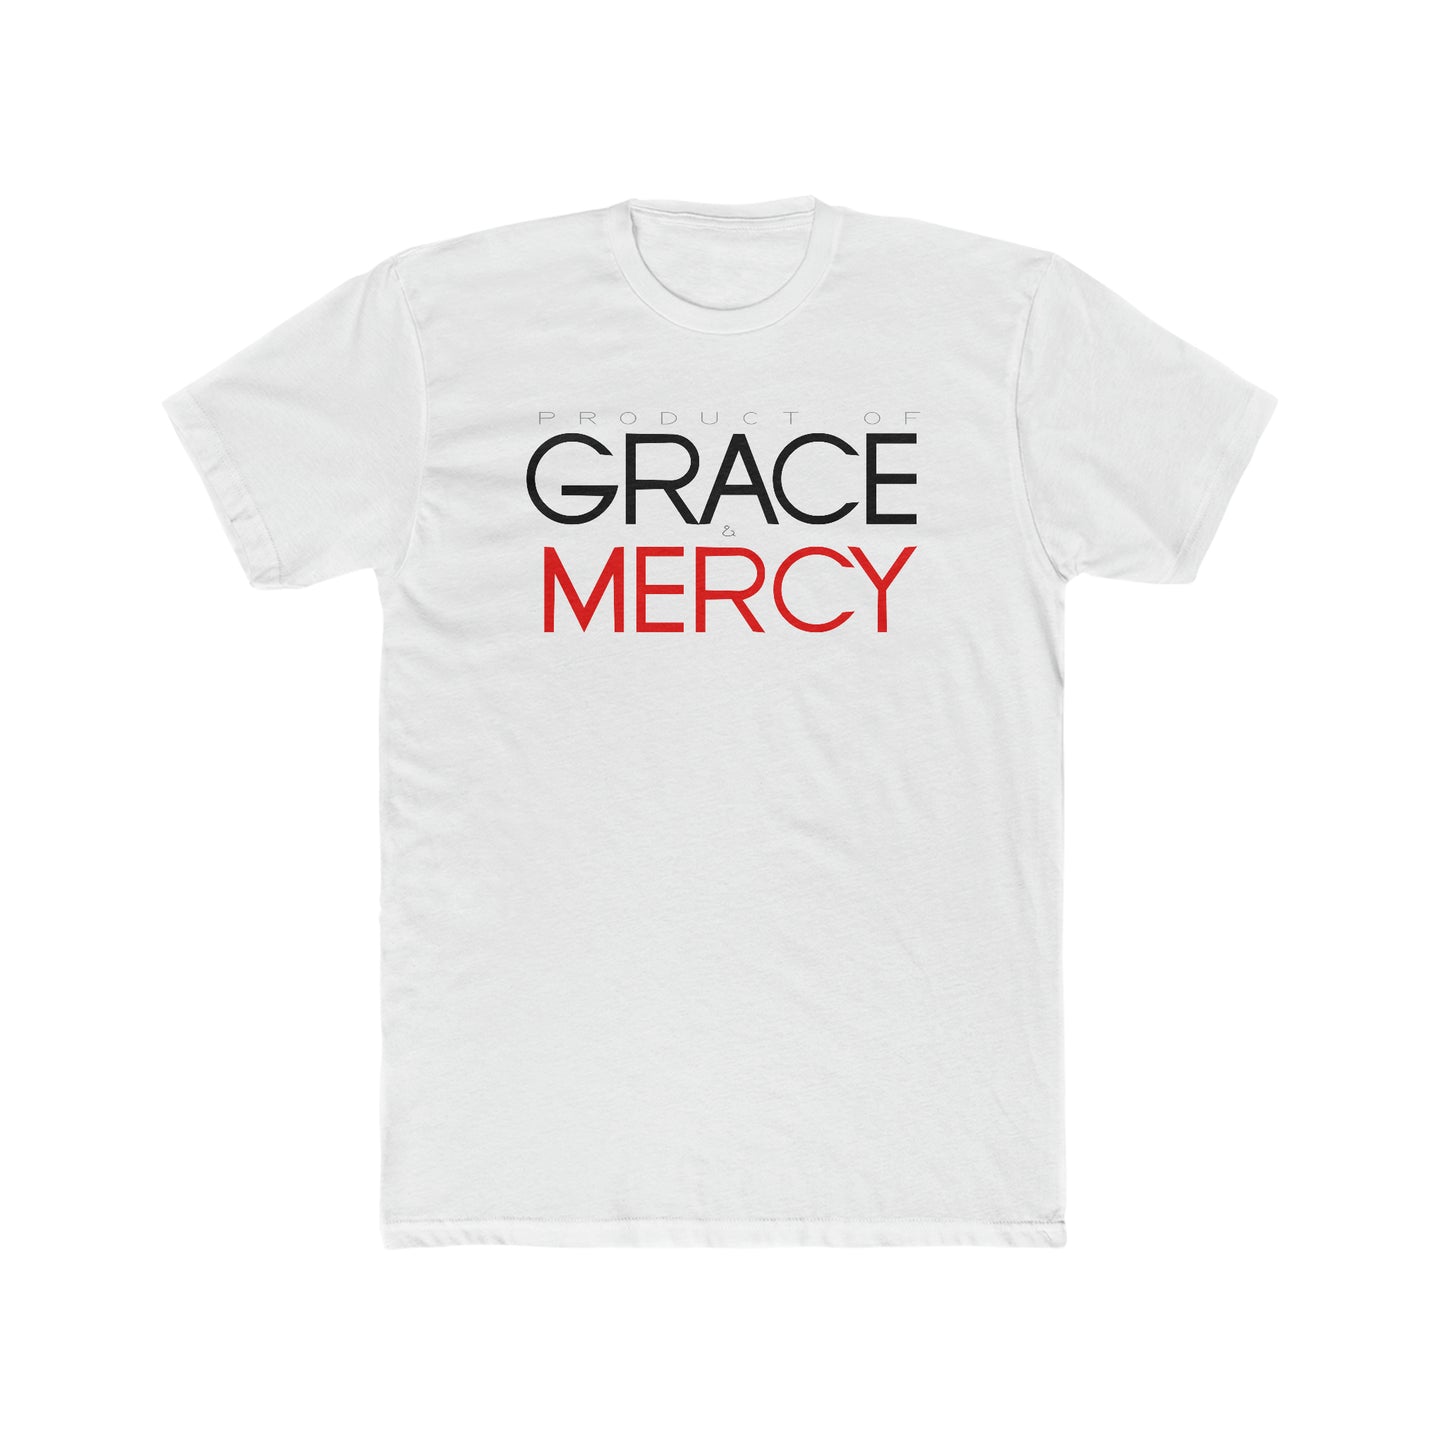 Product of Grace and Mercy Tee